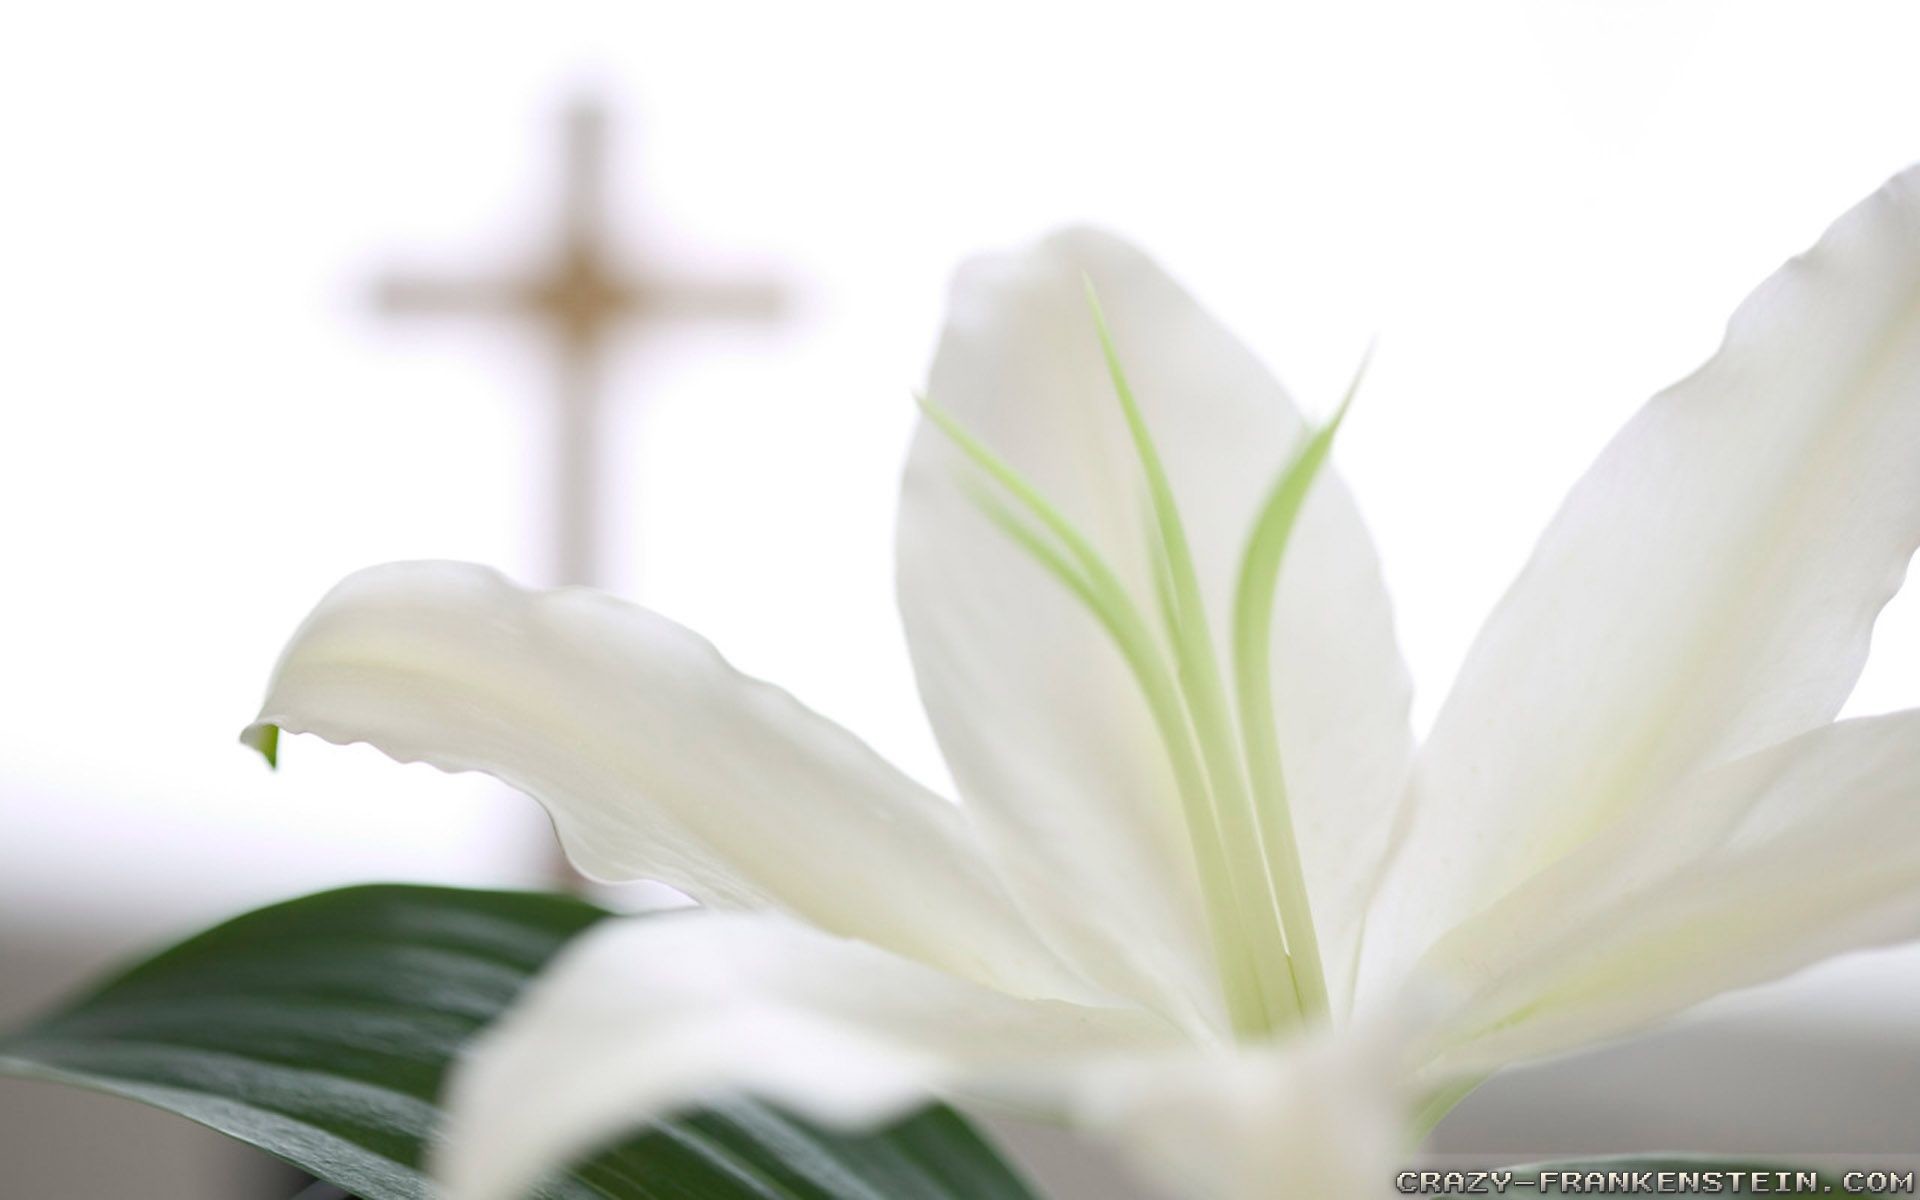 Download A Scene of Faith Reflection and Prayer on Easter Sunday Wallpaper   Wallpaperscom